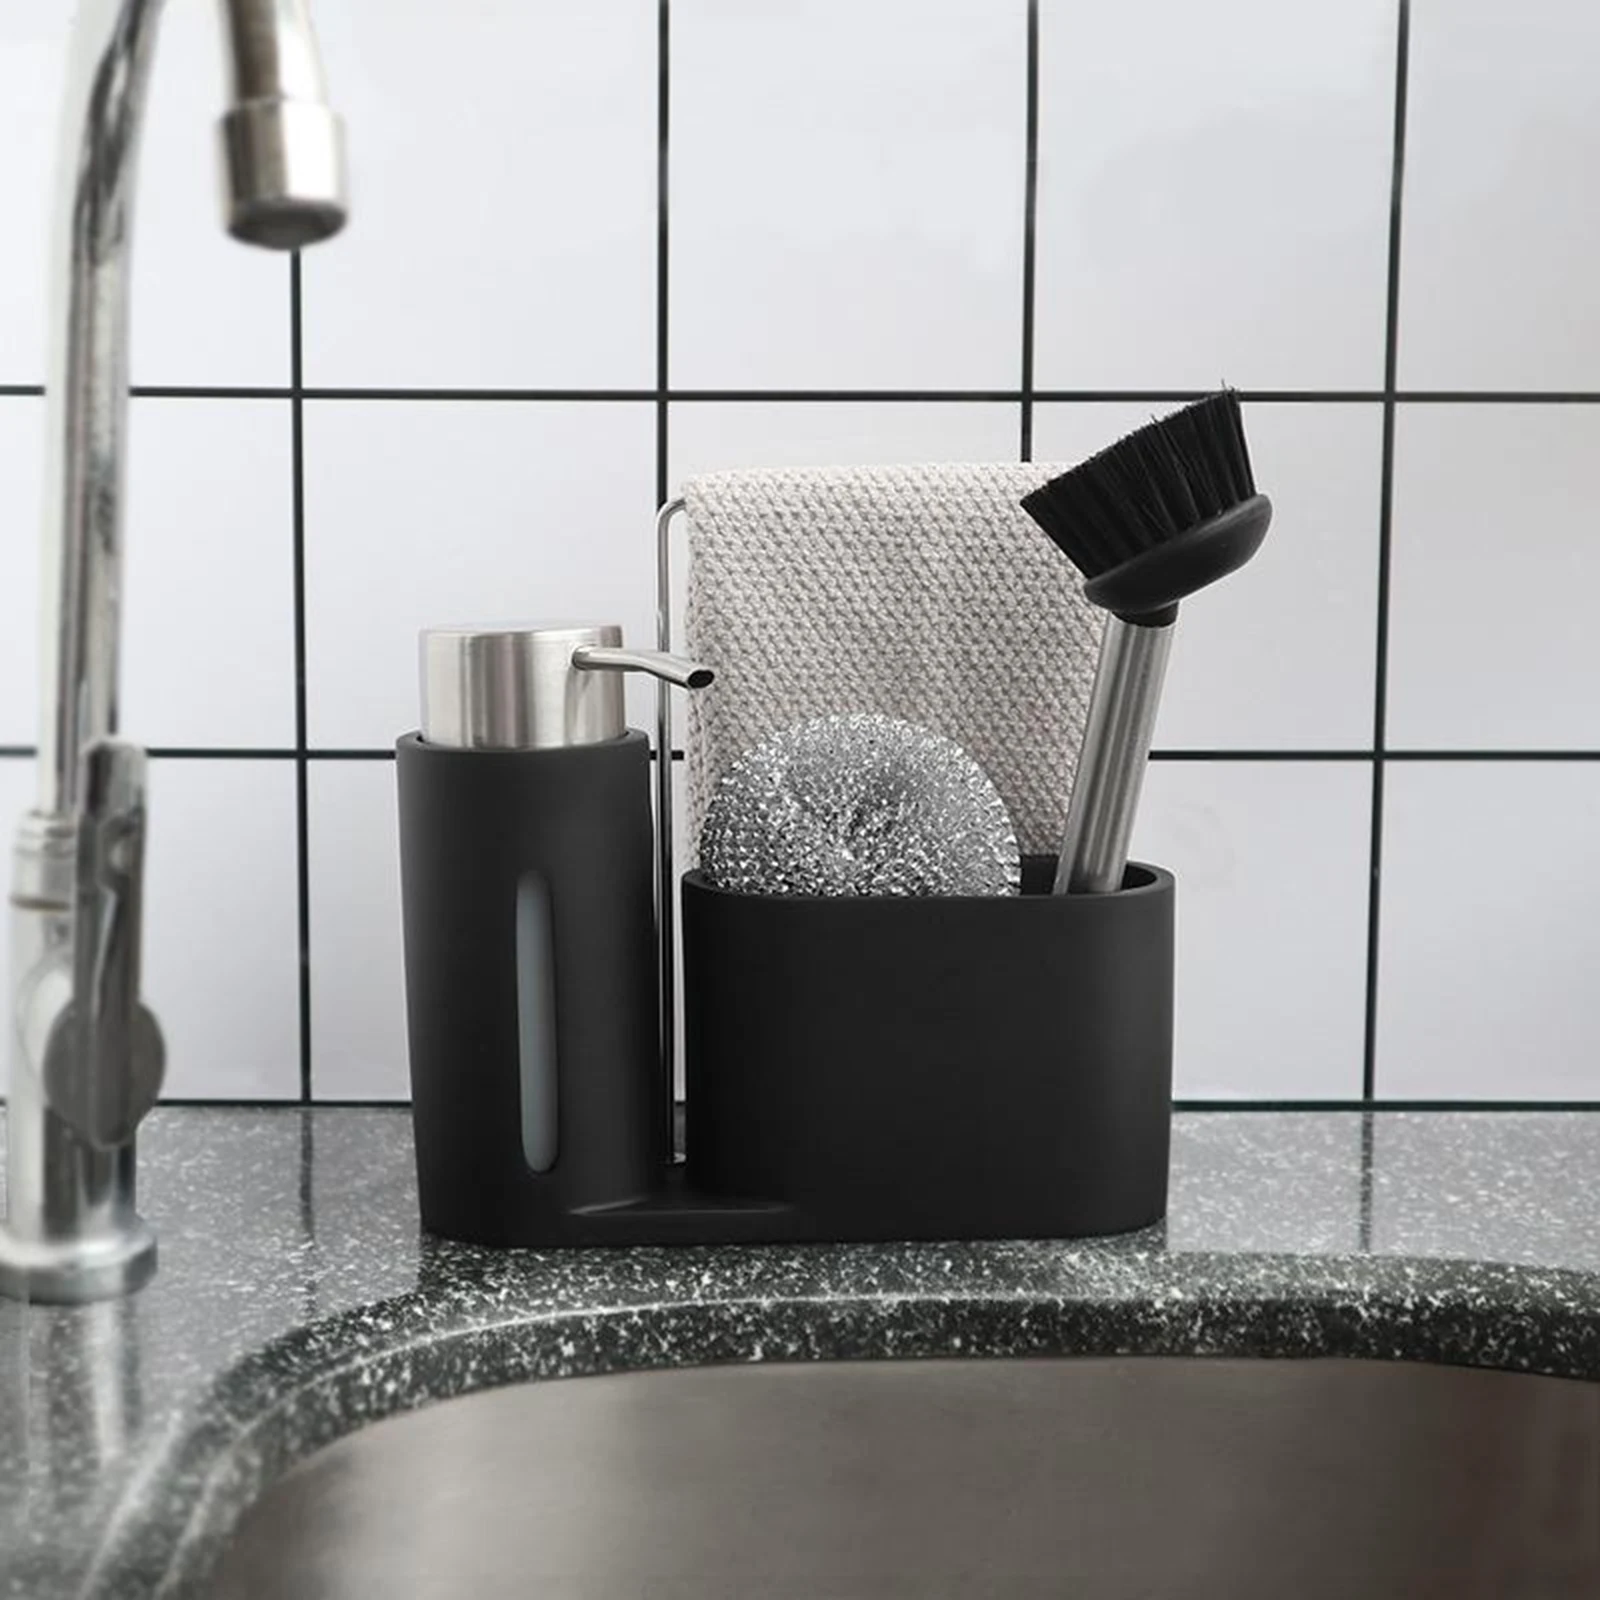 

Multi-Function chen Cleaning Soap Dispenser Steel Ball Dishwashing Brush Rag Storage Holder Caddy for Sink Countertop